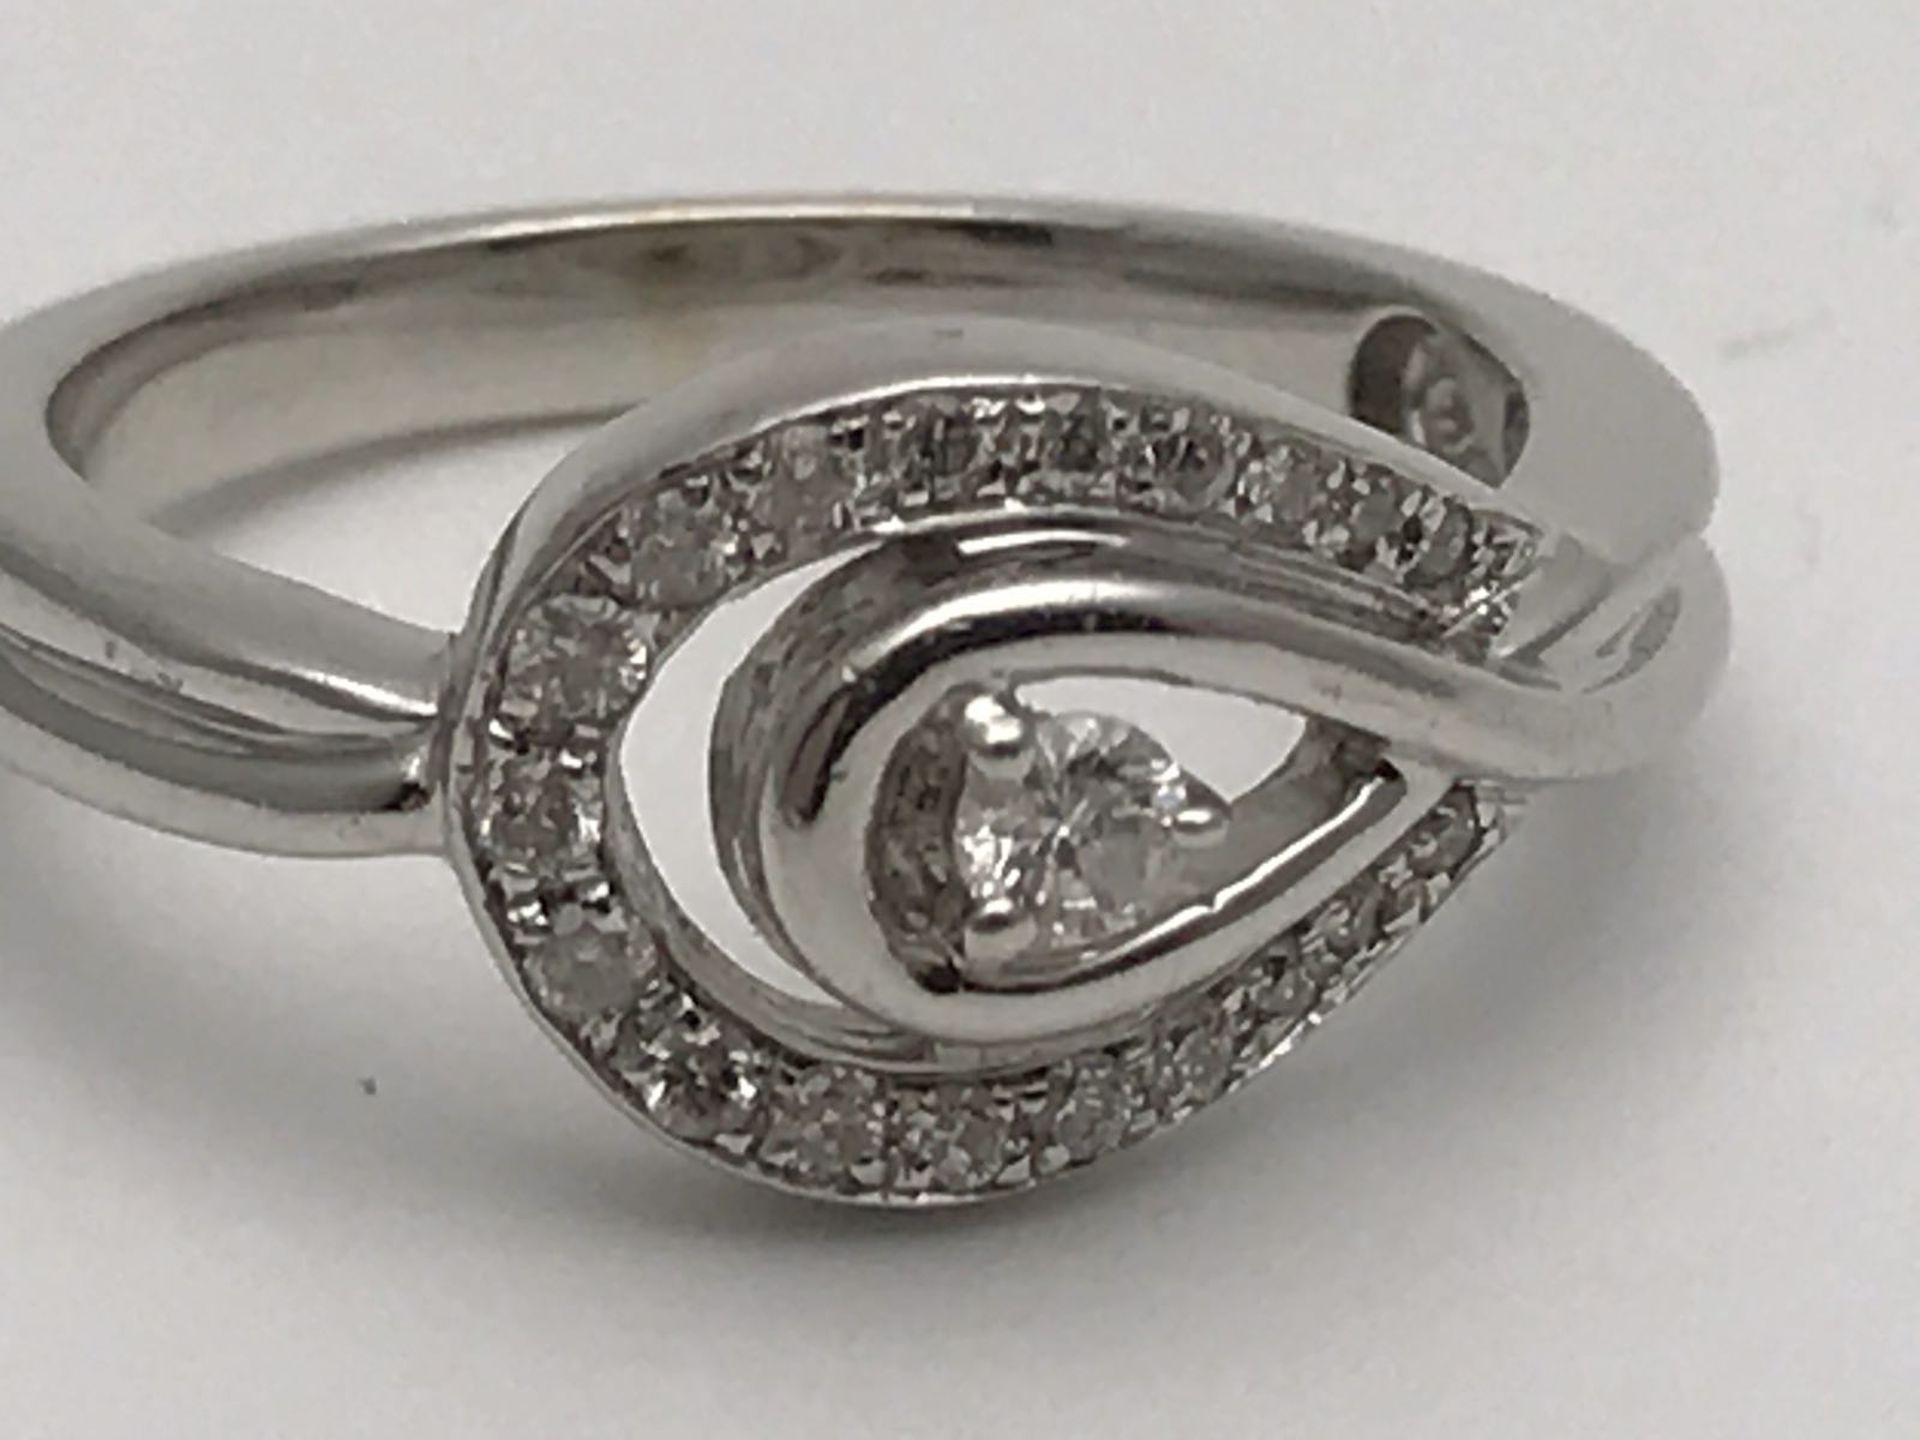 RRP £2500 A WHITE GOLD DIAMOND RING MADE TO FORM A LOOP & SET WITH HIGH QUALITY DIAMONDS GIVING